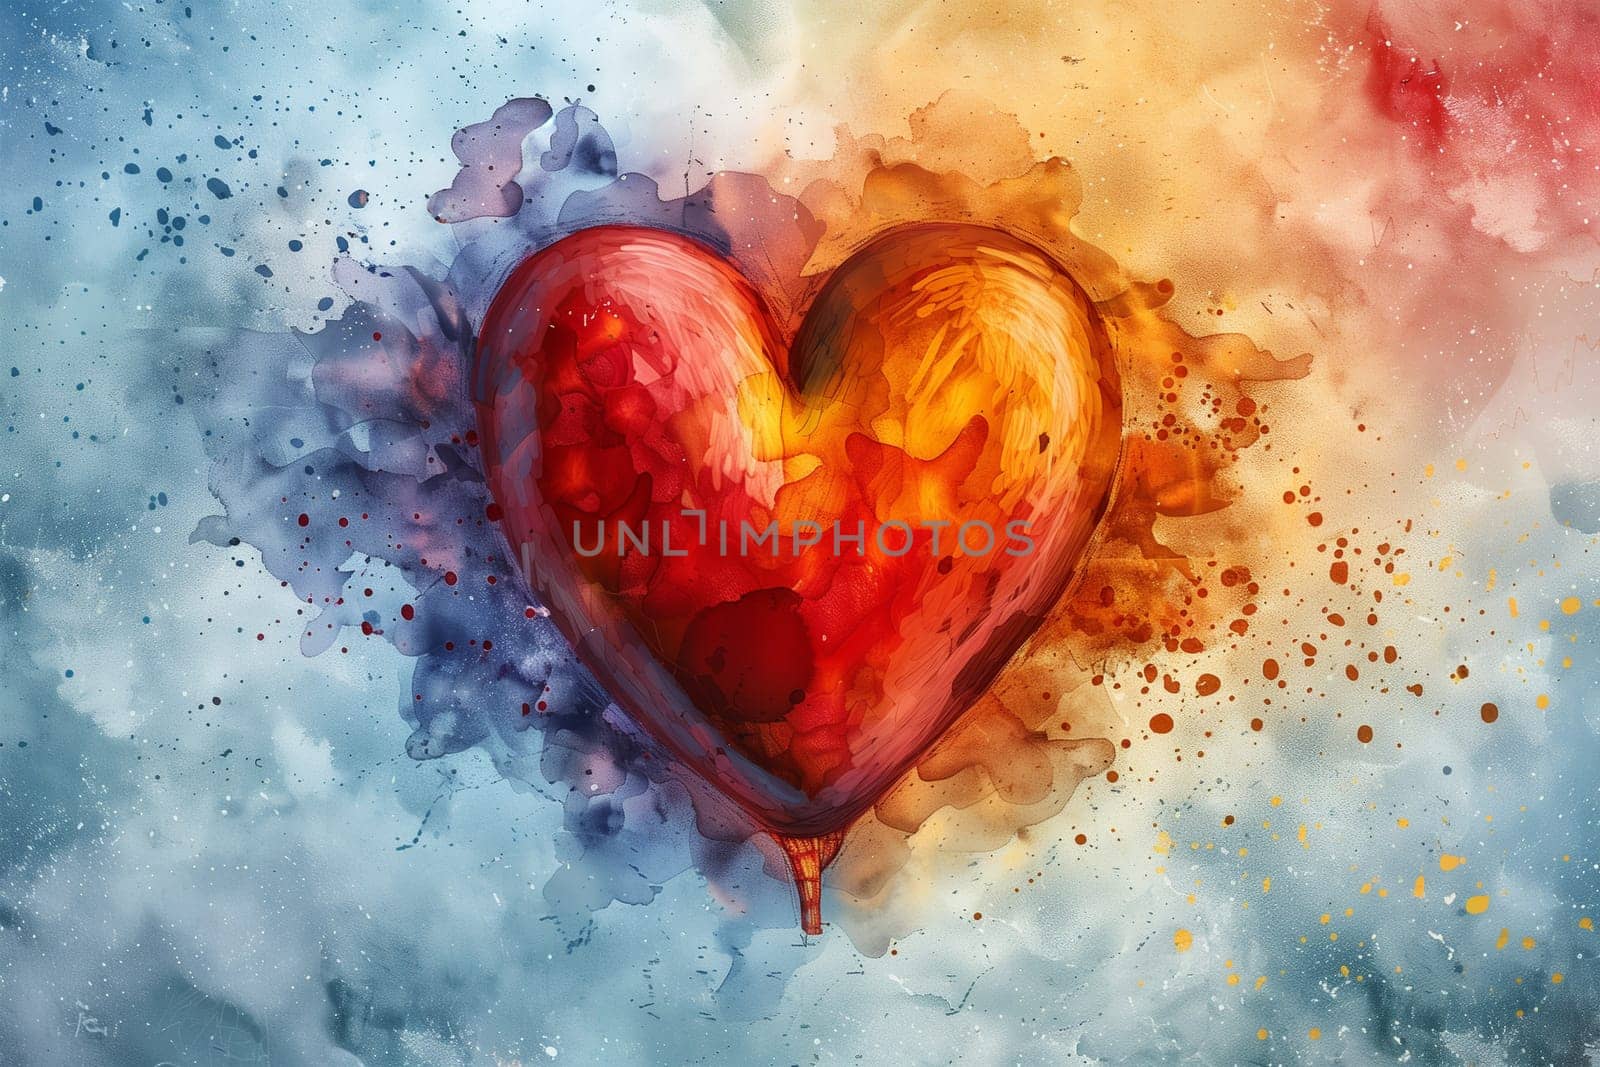 Heart Painting on Colorful Background by Sd28DimoN_1976